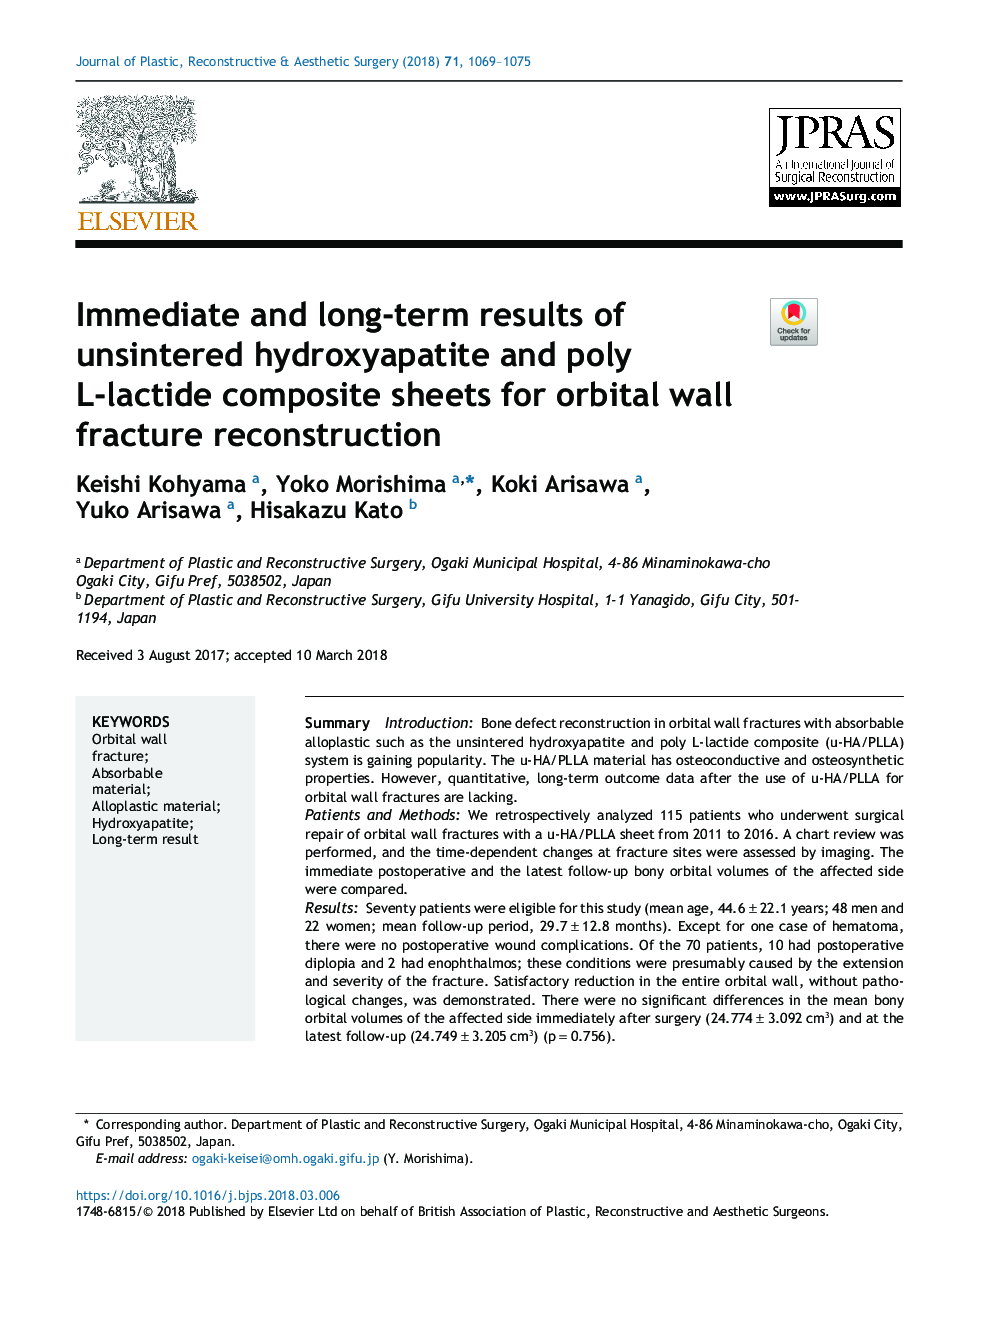 Immediate and long-term results of unsintered hydroxyapatite and poly L-lactide composite sheets for orbital wall fracture reconstruction